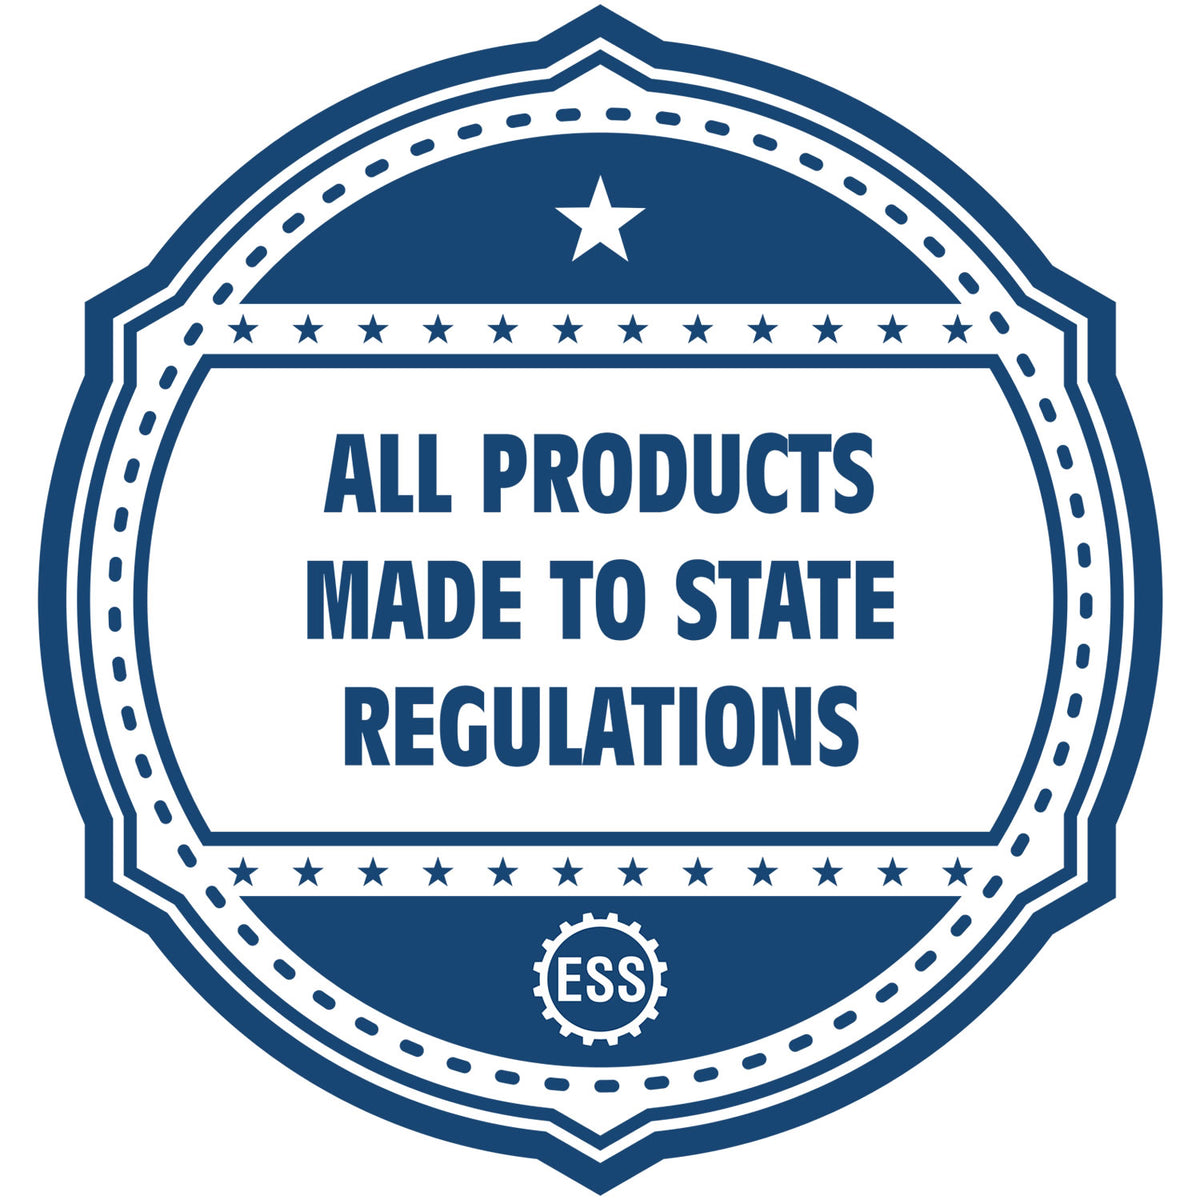 An icon or badge element for the Vermont Professional Engineer Seal Stamp showing that this product is made in compliance with state regulations.